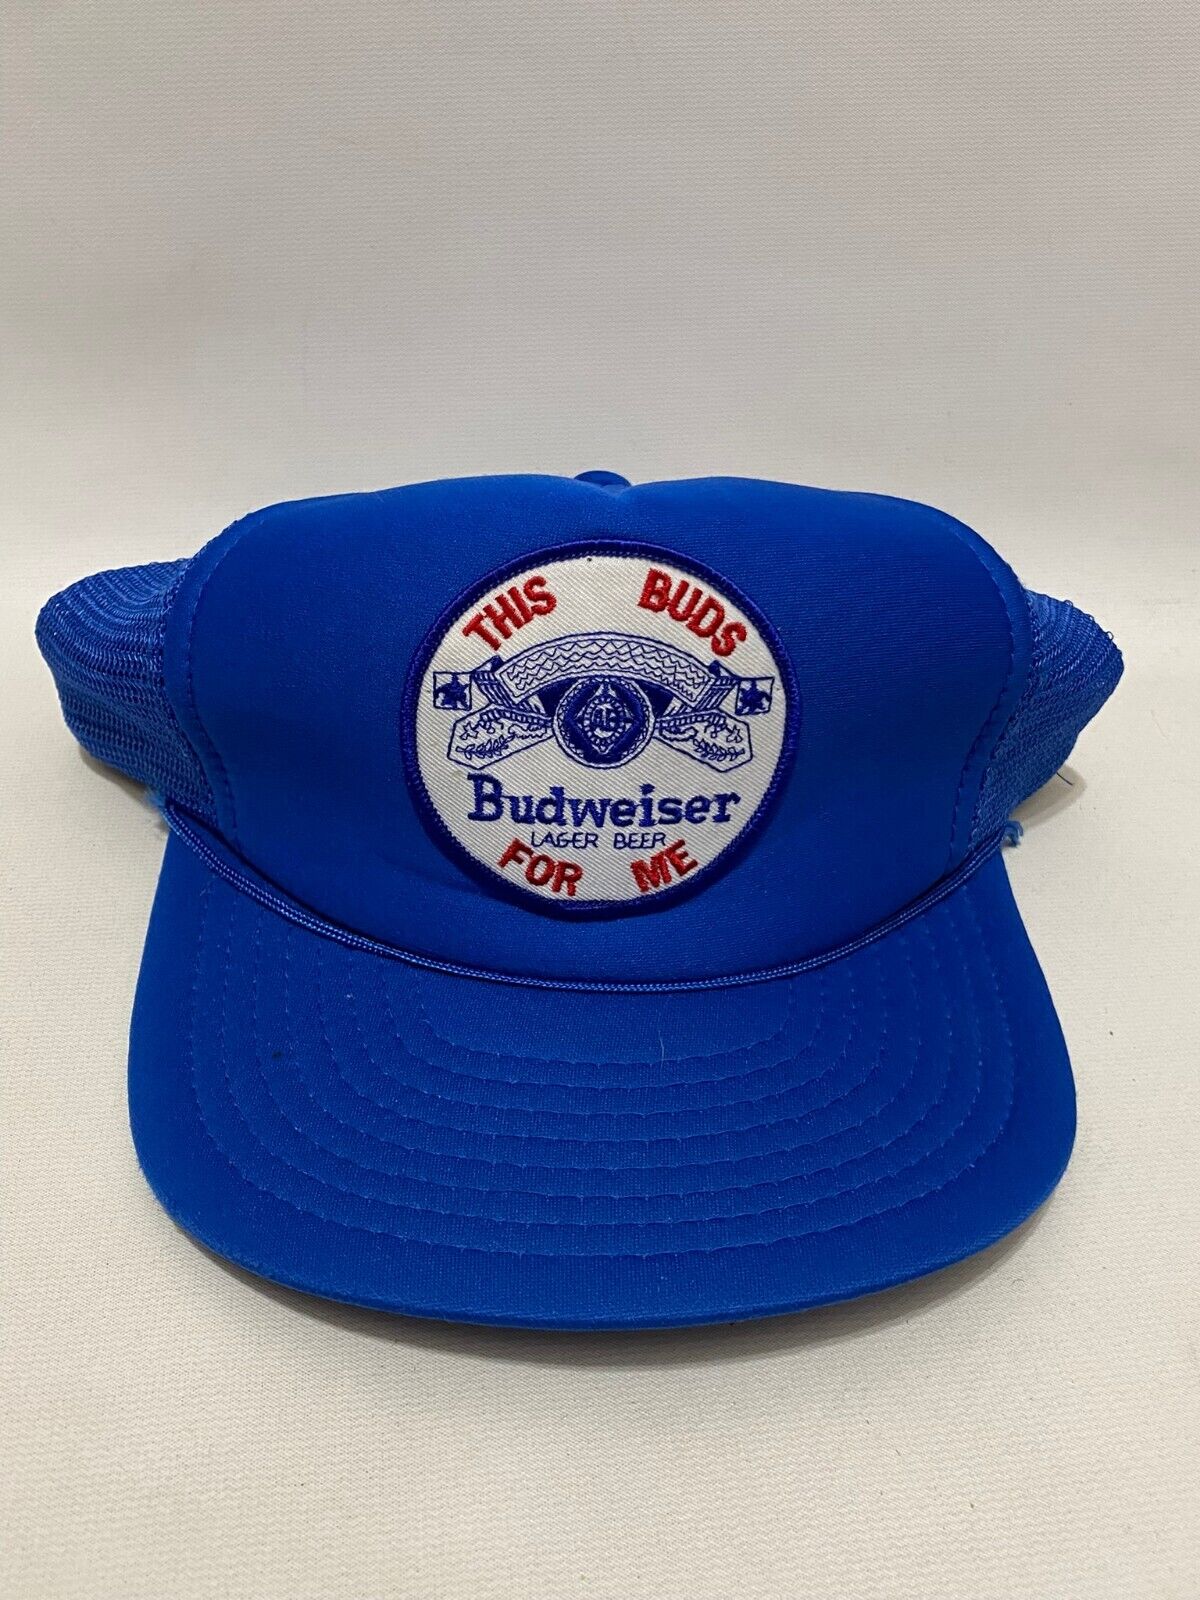 Vintage Budweiser This Buds For Me Snap Back Trucker Hat Beer One Size w/ Patch